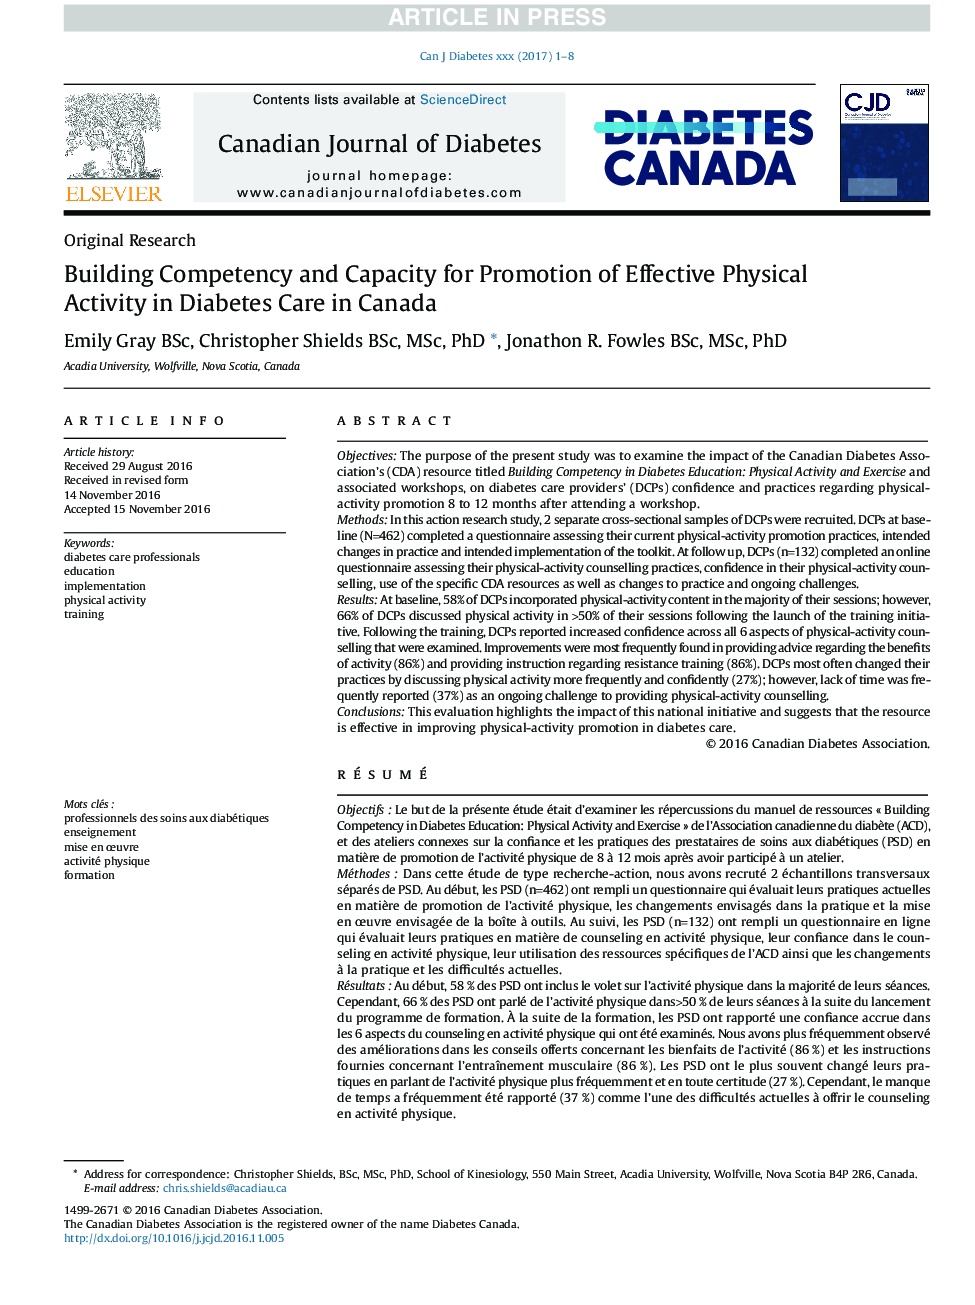 Building Competency and Capacity for Promotion of Effective Physical Activity in Diabetes Care in Canada